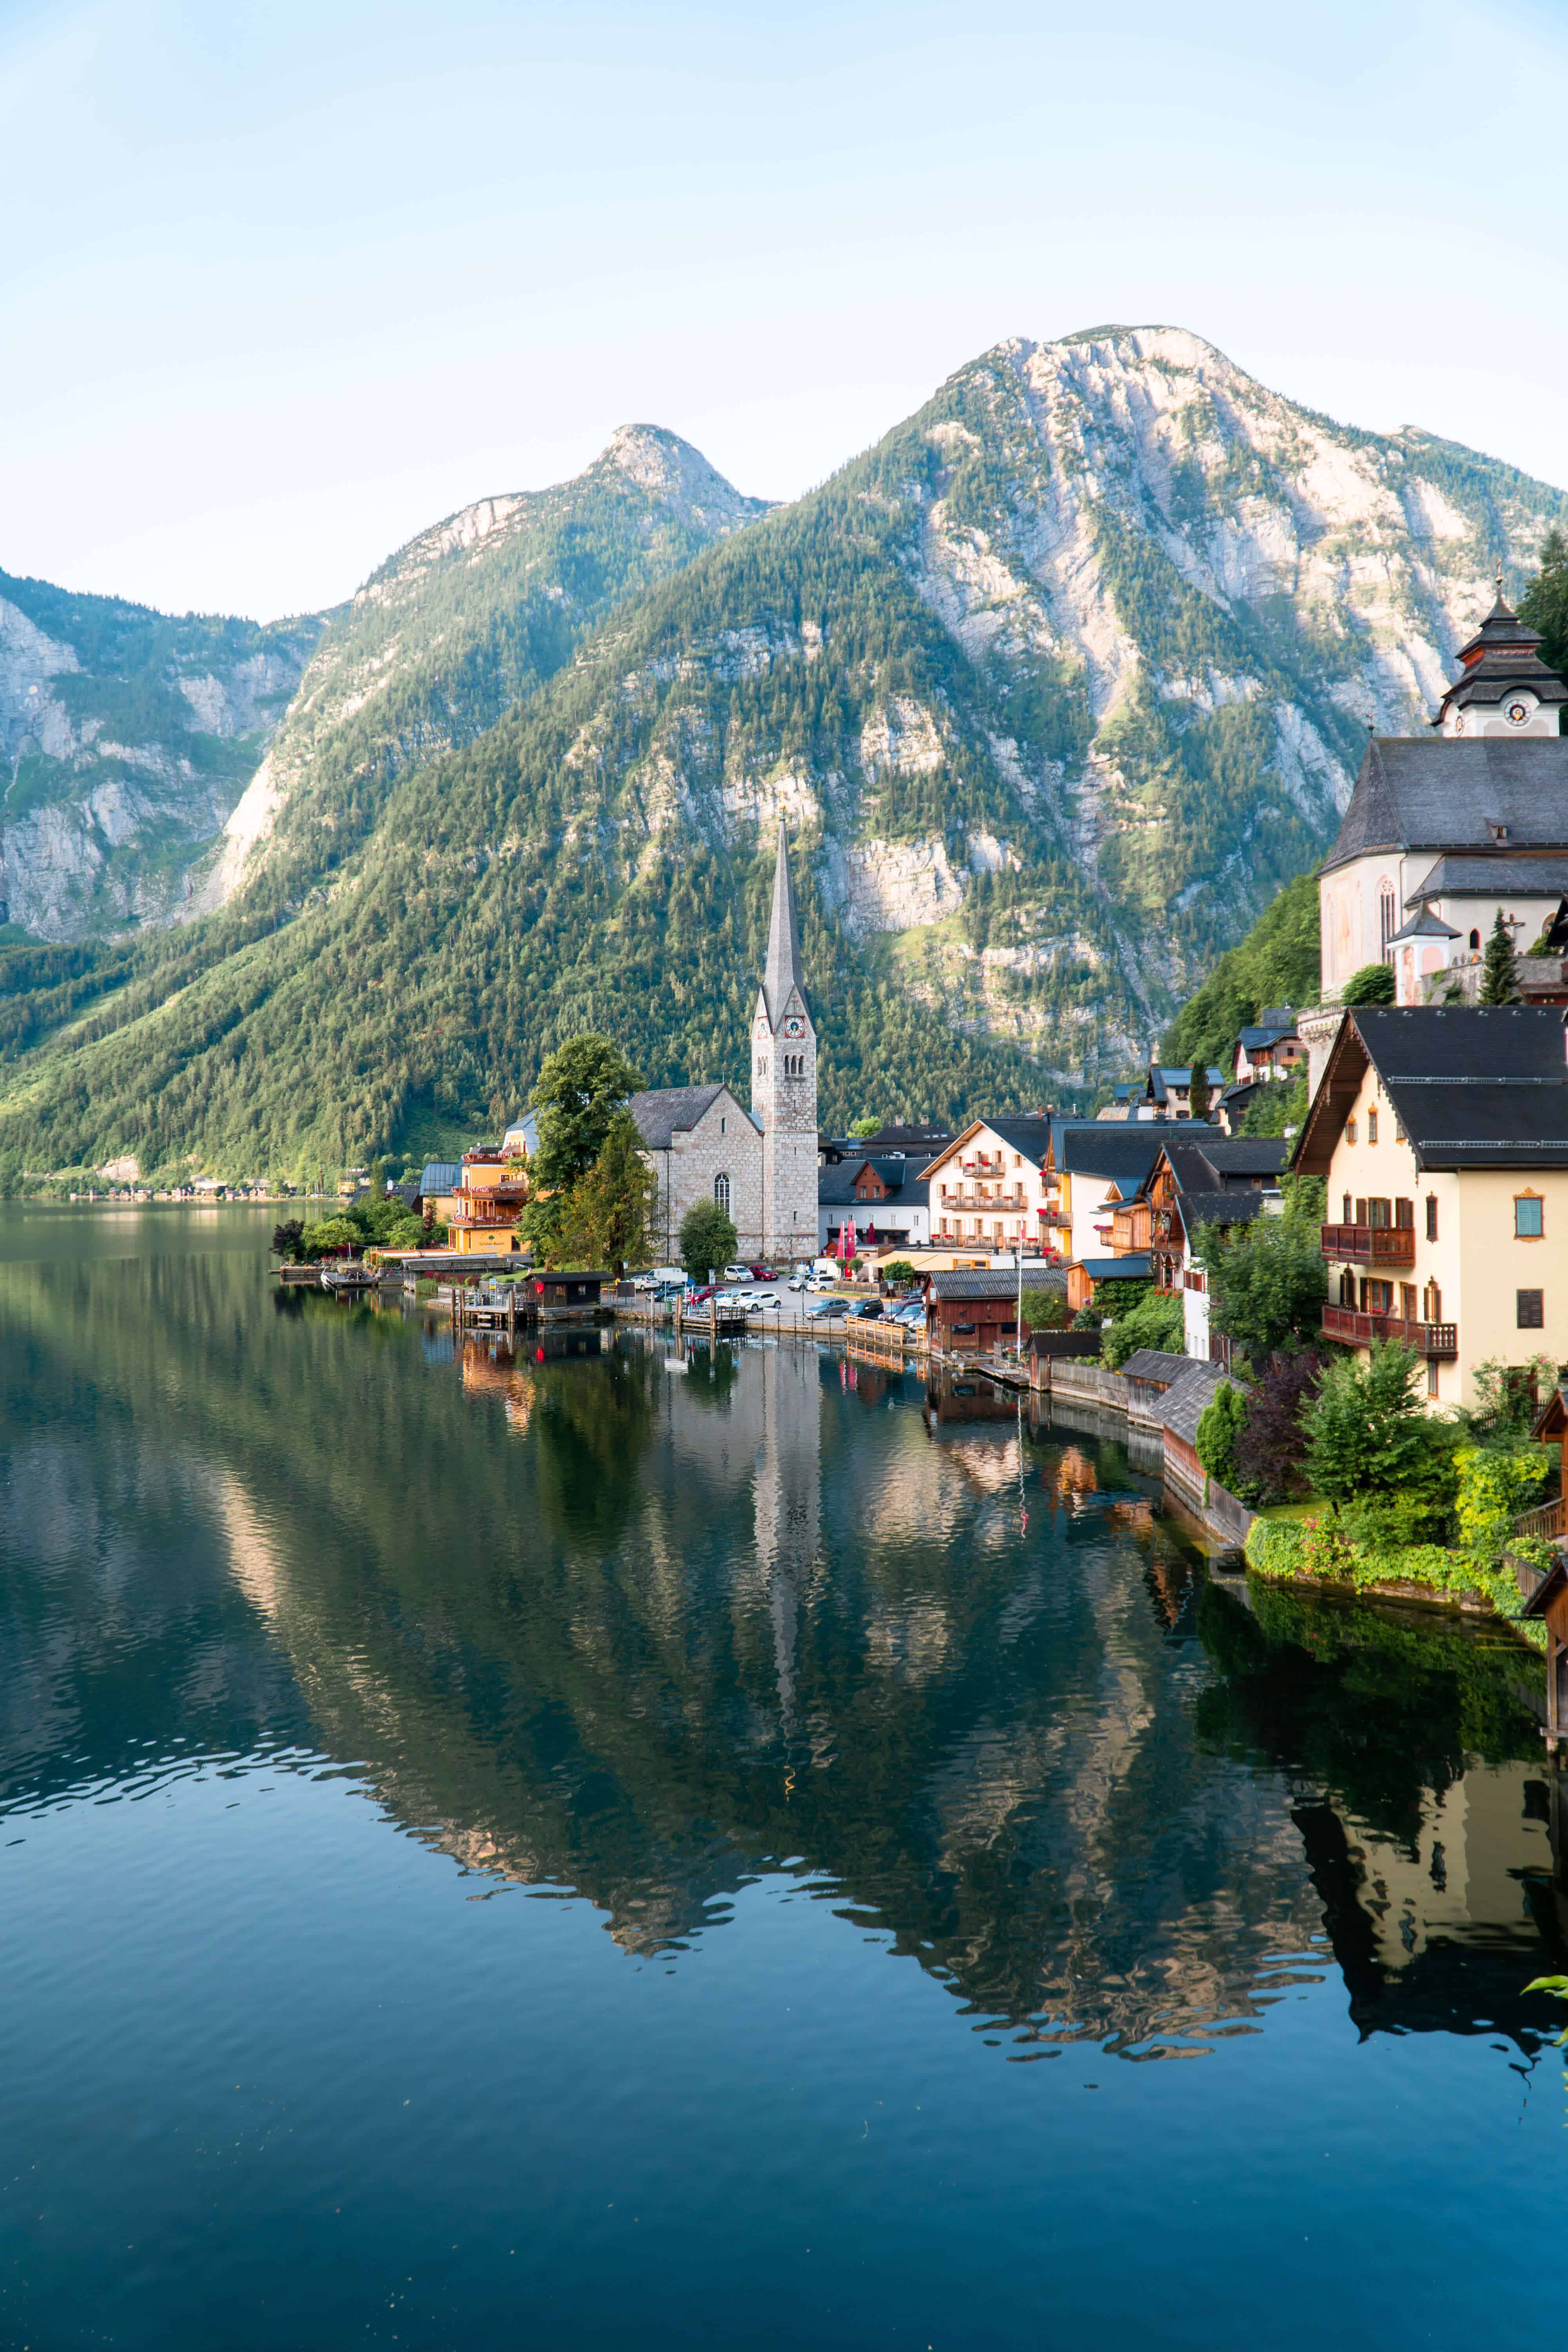 The Ultimate Guide to Hallstatt Austria | View of the town and lake | The Republic of Rose | #Hallstatt #Austria #Europe #Travel